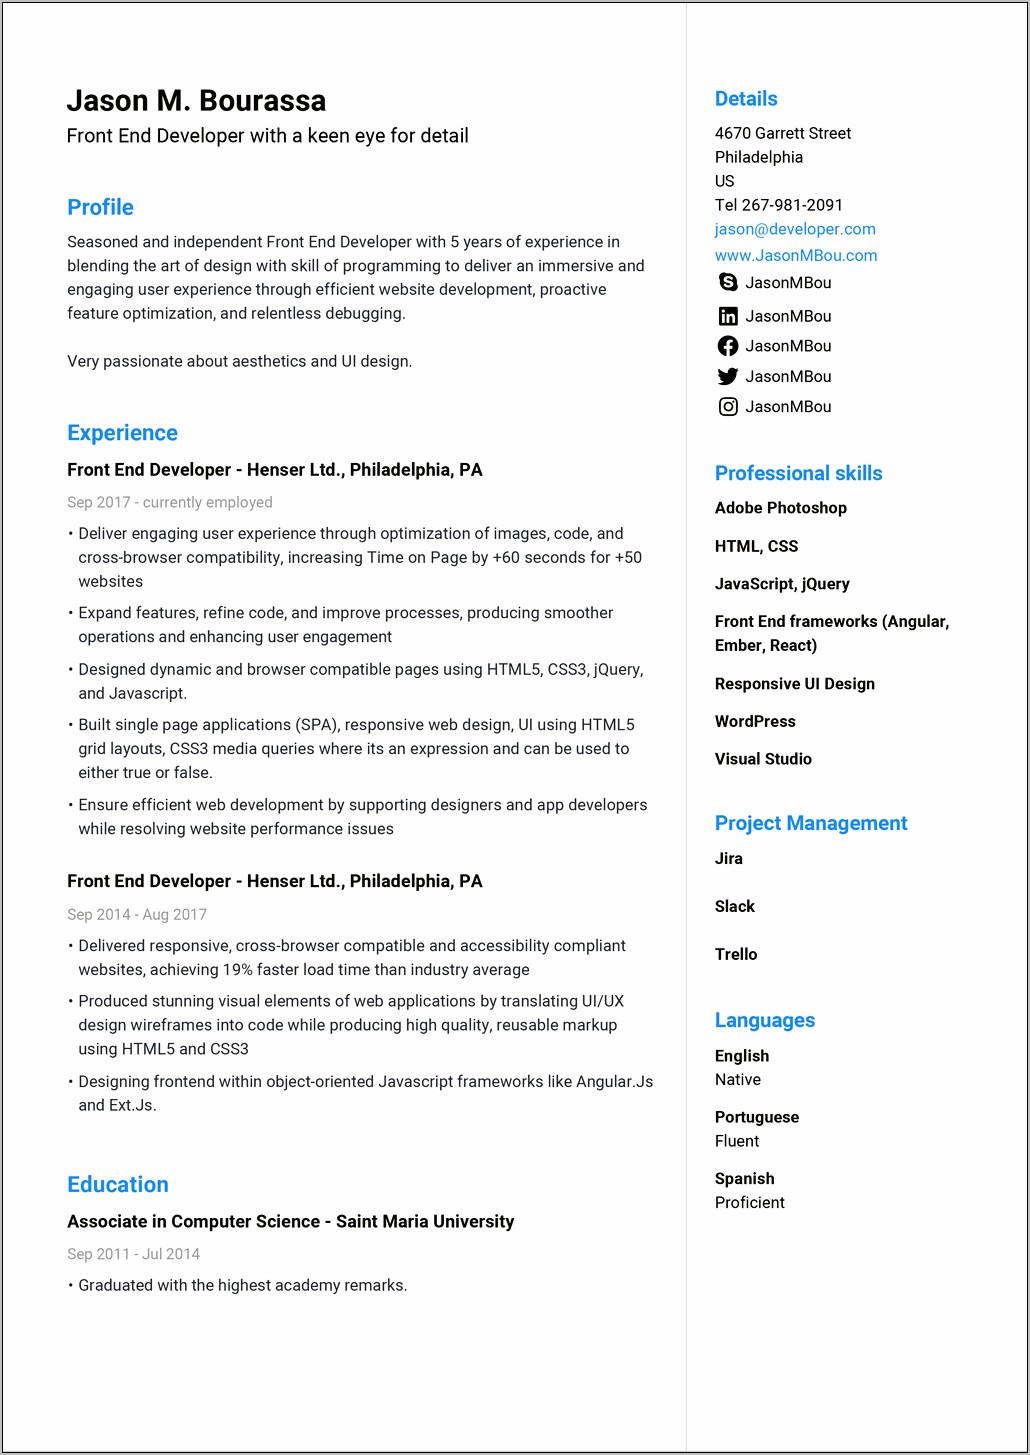 Apply For Jobs With Online Resume